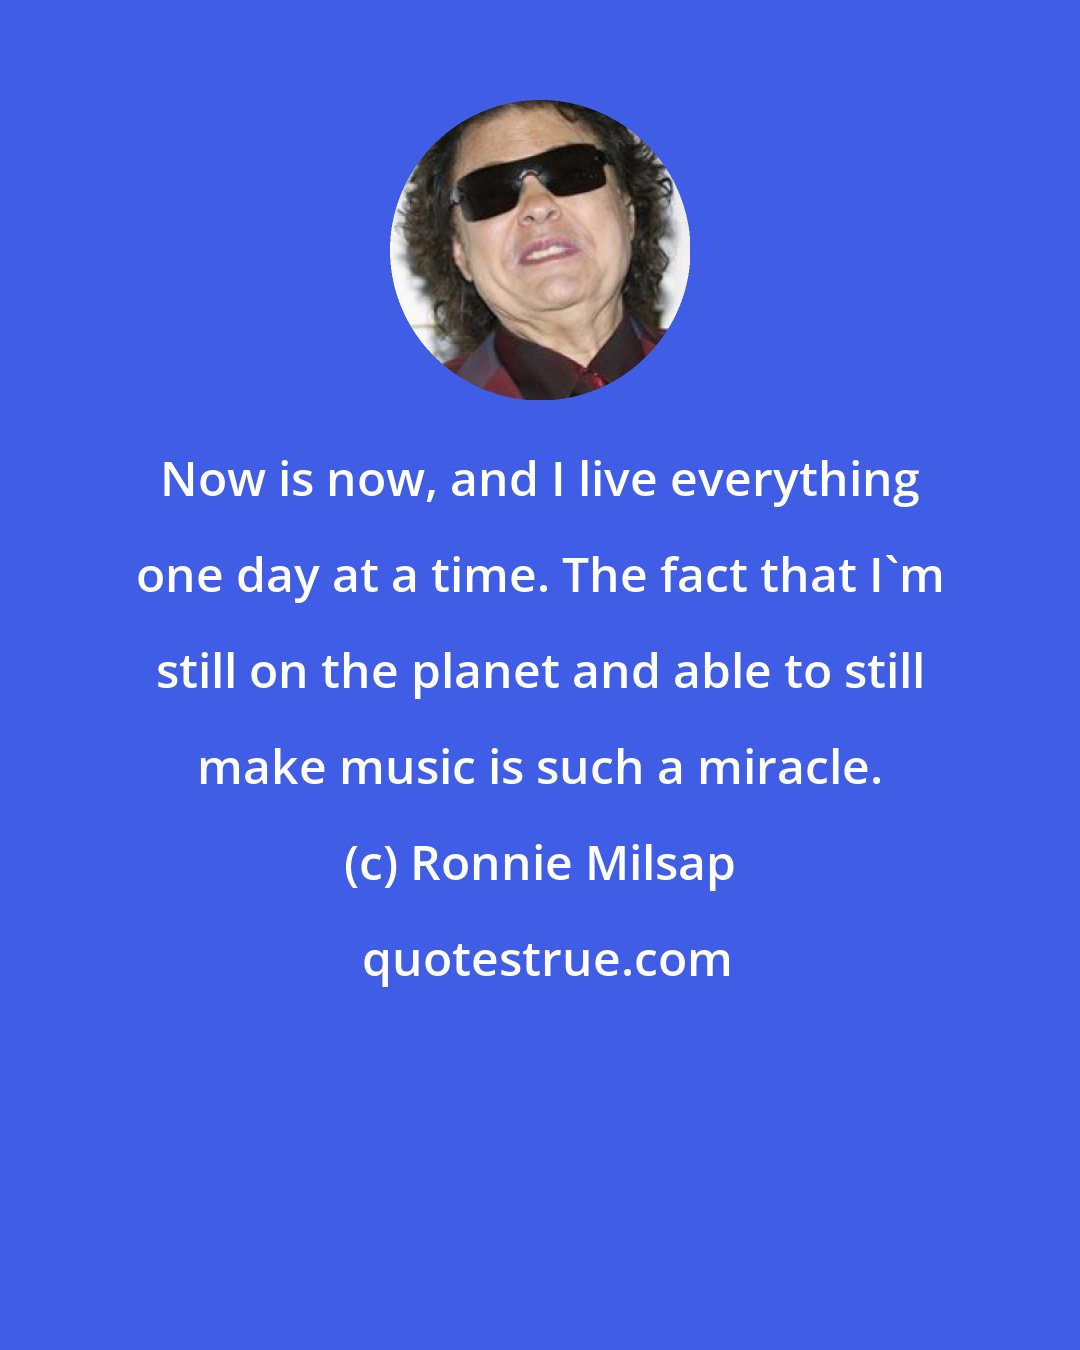 Ronnie Milsap: Now is now, and I live everything one day at a time. The fact that I'm still on the planet and able to still make music is such a miracle.